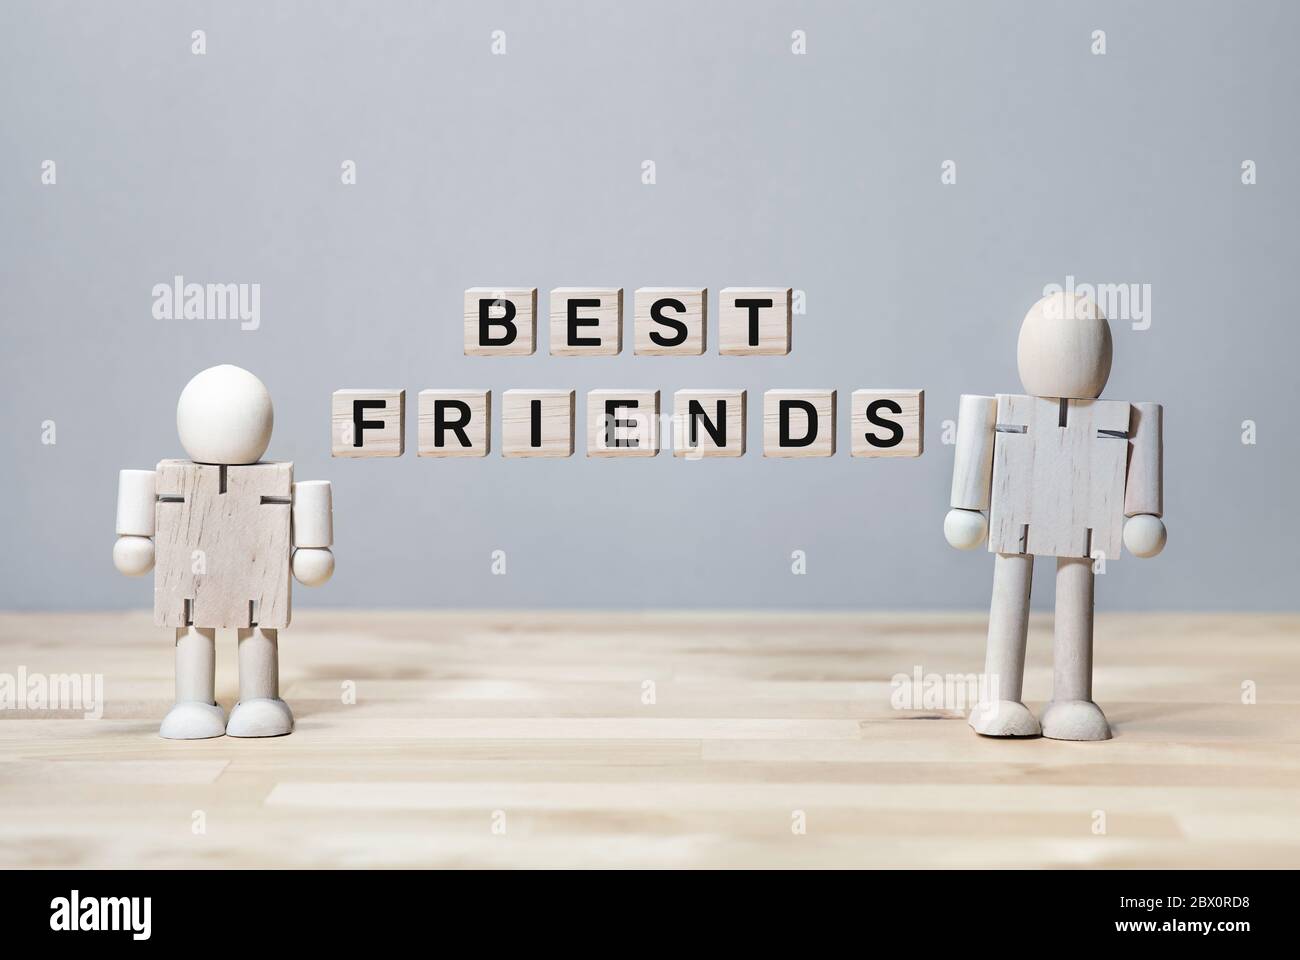 Best friends concepts with text message and wood toy mockup.together and relationship.teamwork and buddy Stock Photo